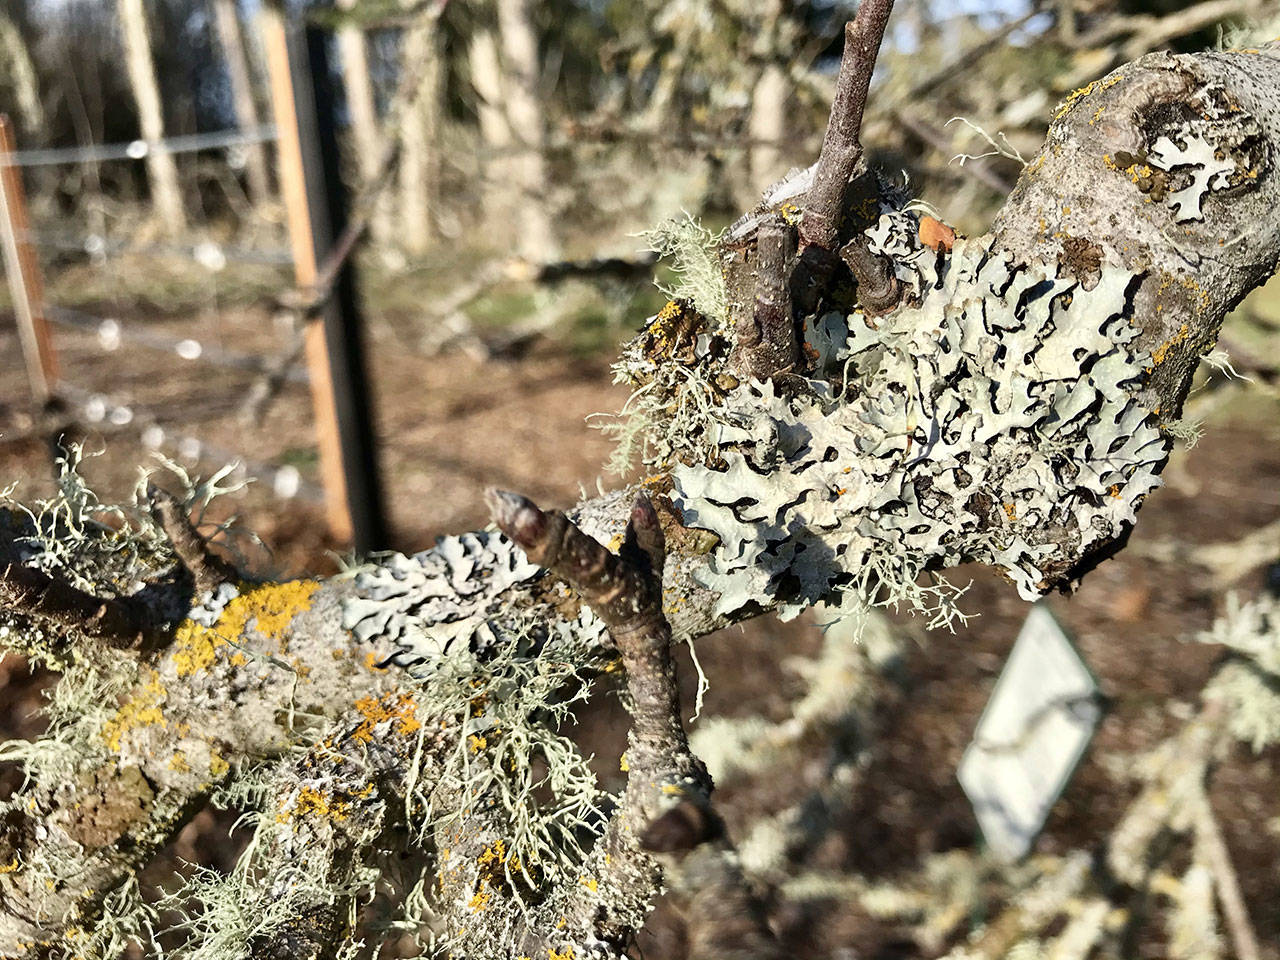 The presence of lichen is a good environmental sign, Master Gardeners say: they do not damage the bark or rob the plant of moisture or nutrients, and since they don’t tolerate air pollution, their presence is an indication of good air quality. Photo courtesy of Susan Kalmar